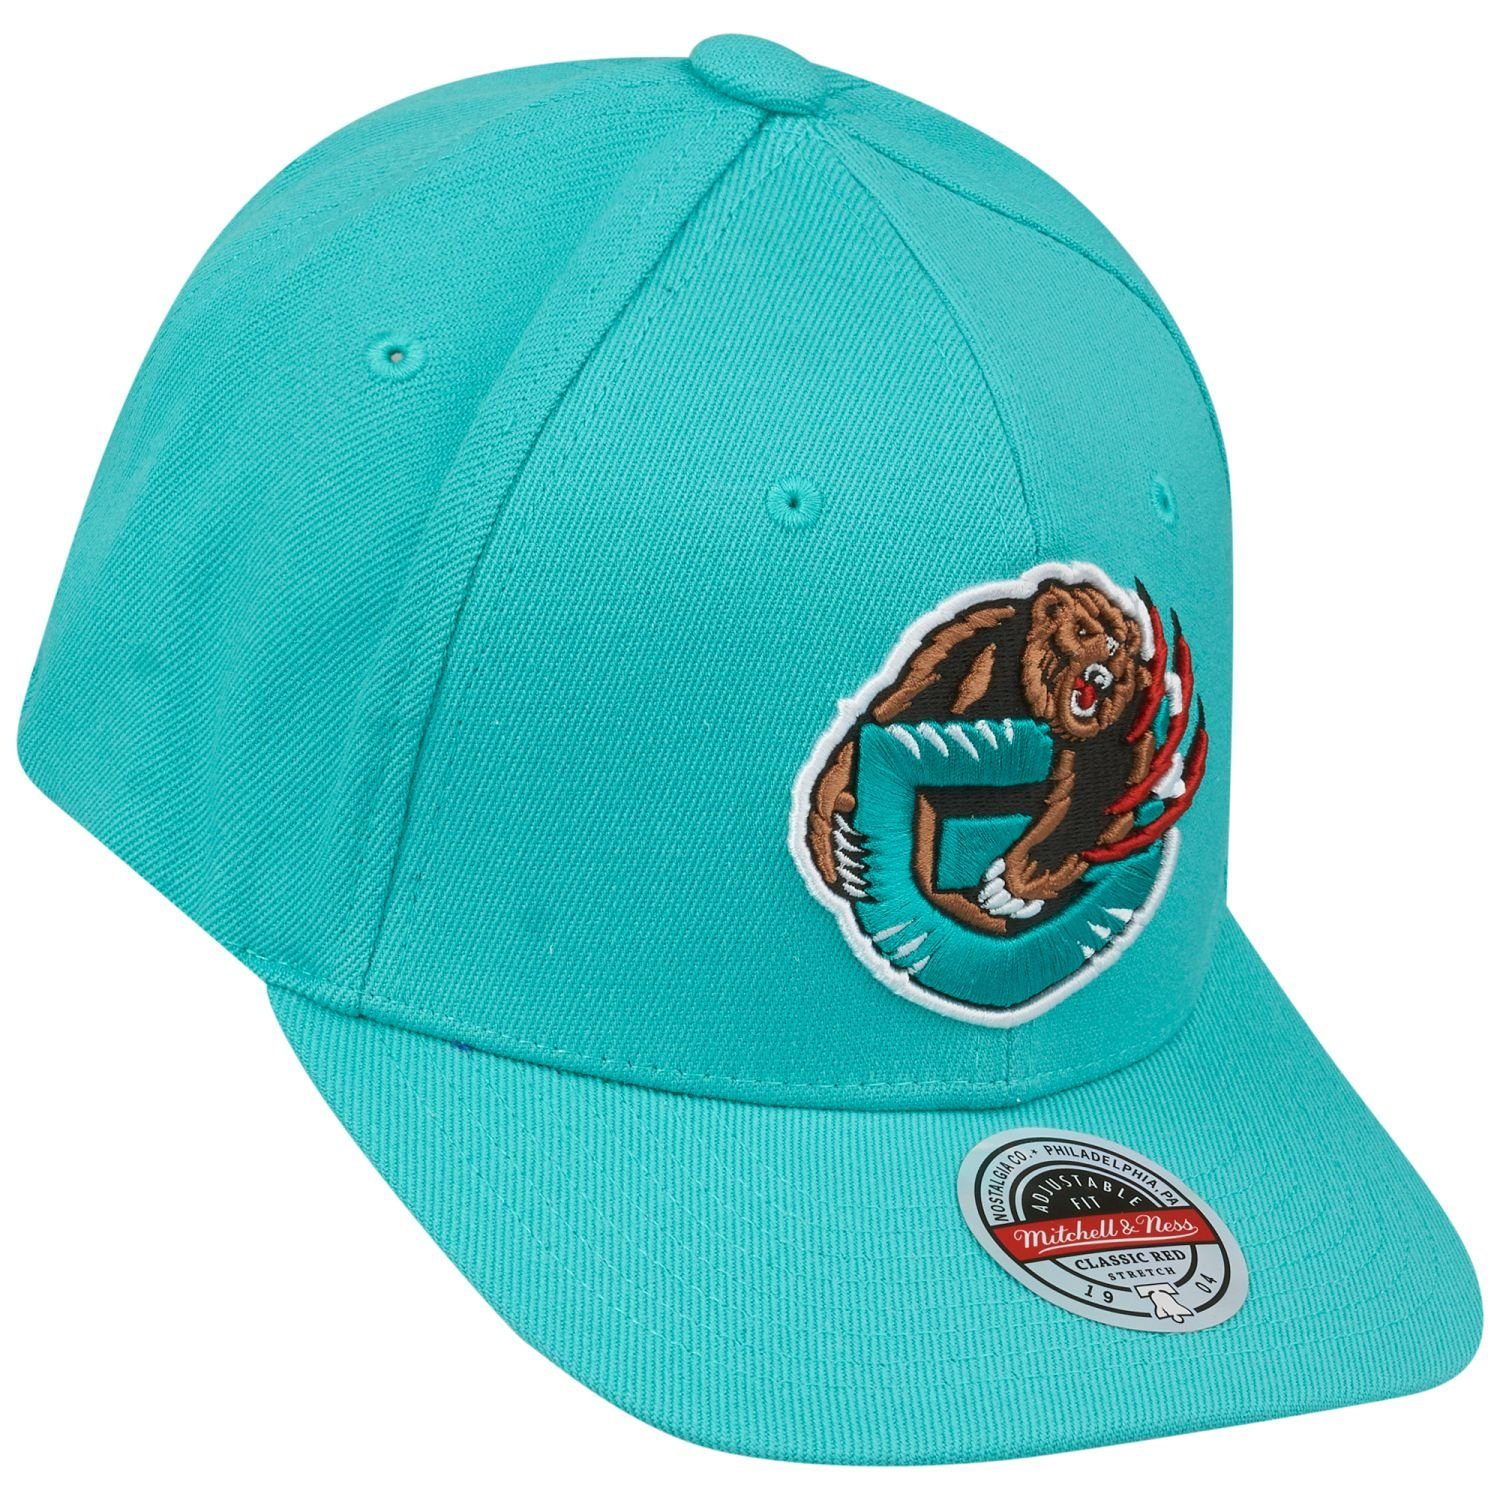 HWC Cap Stretch Vancouver & Snapback Ness Mitchell Grizzlies